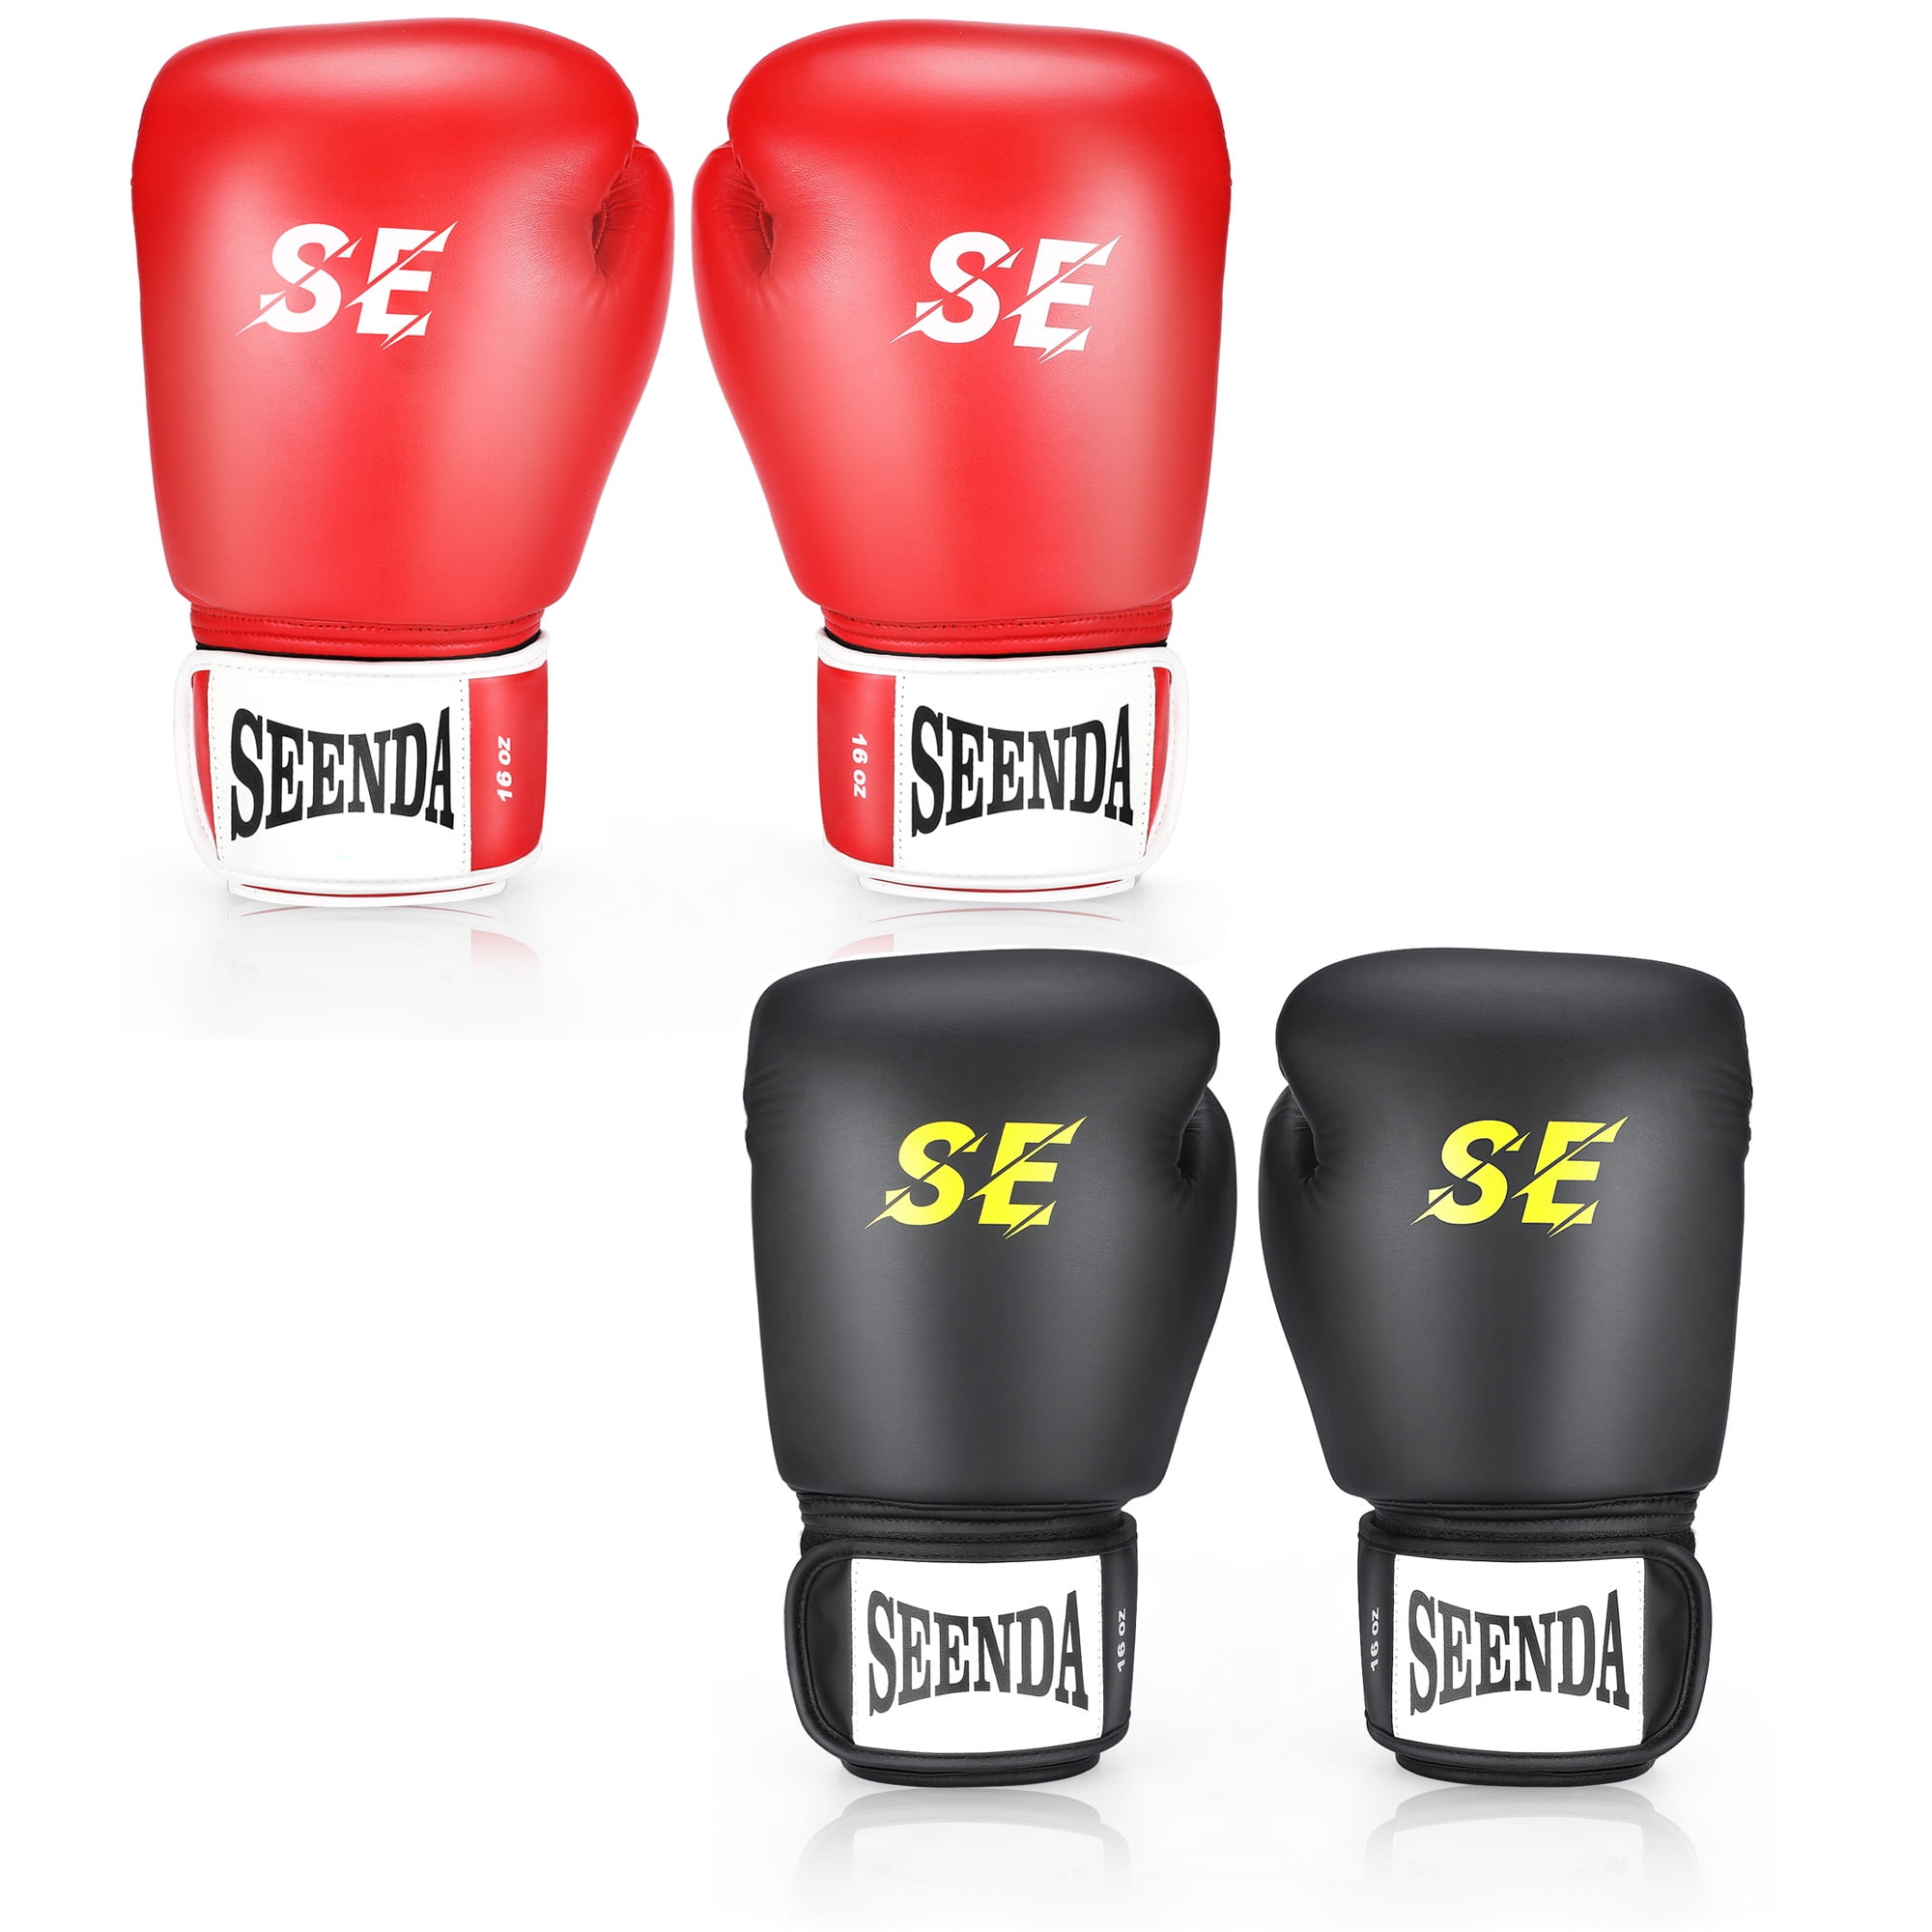 Professional Boxing Gloves Sparring Glove Punch Bag Training MMA Mitts 8oz-16oz 